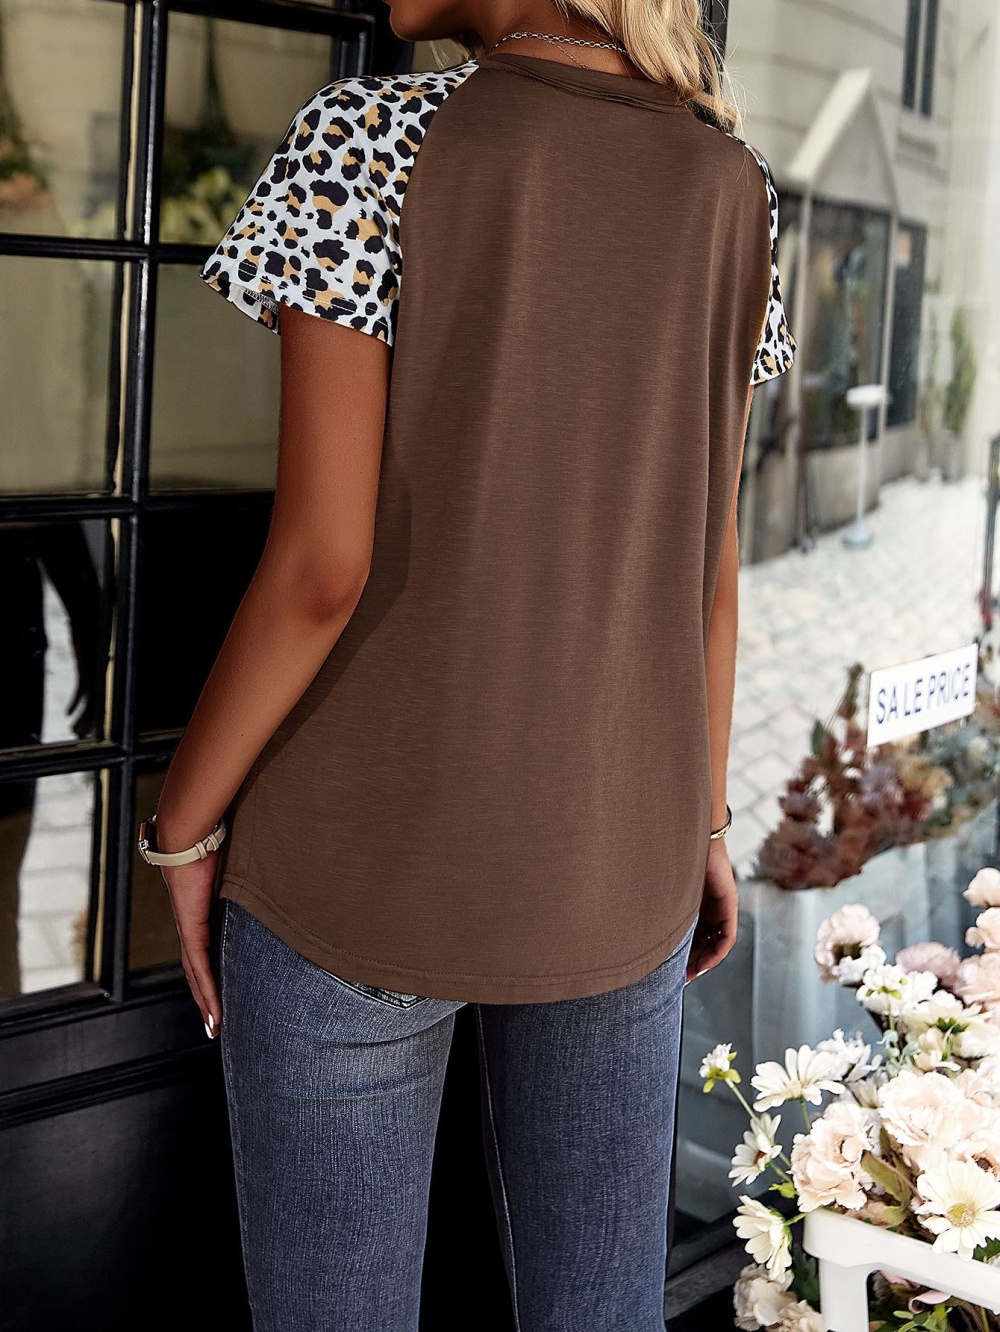 European style splice leopard spring and summer tops